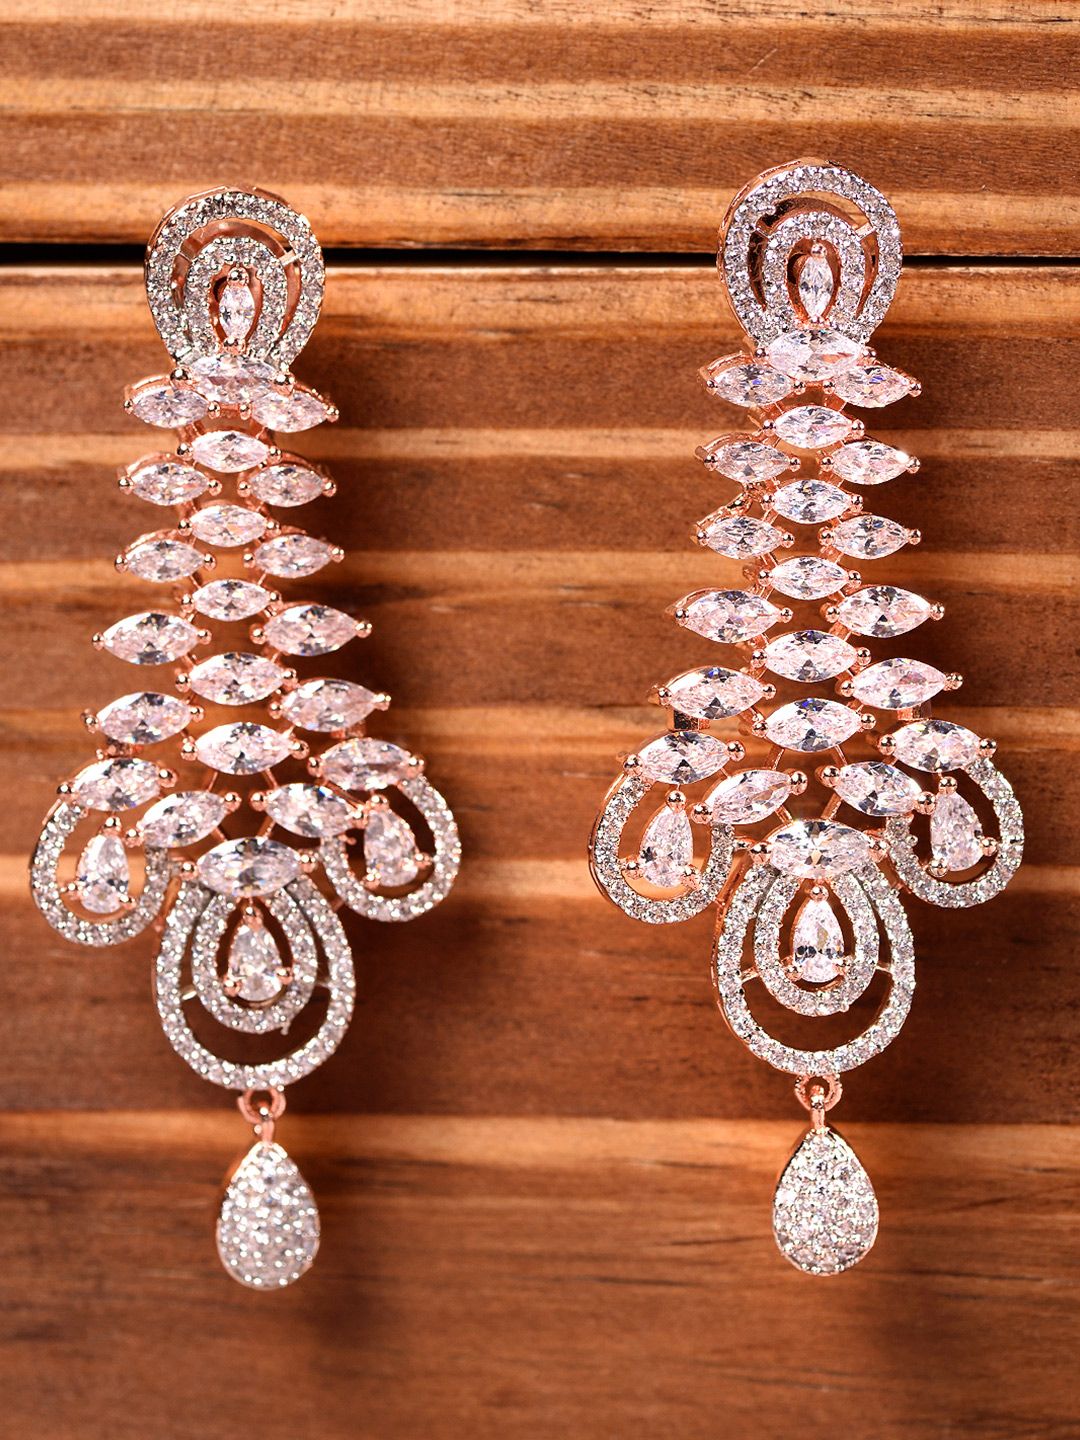 Saraf RS Jewellery White Contemporary Drop Earrings Price in India